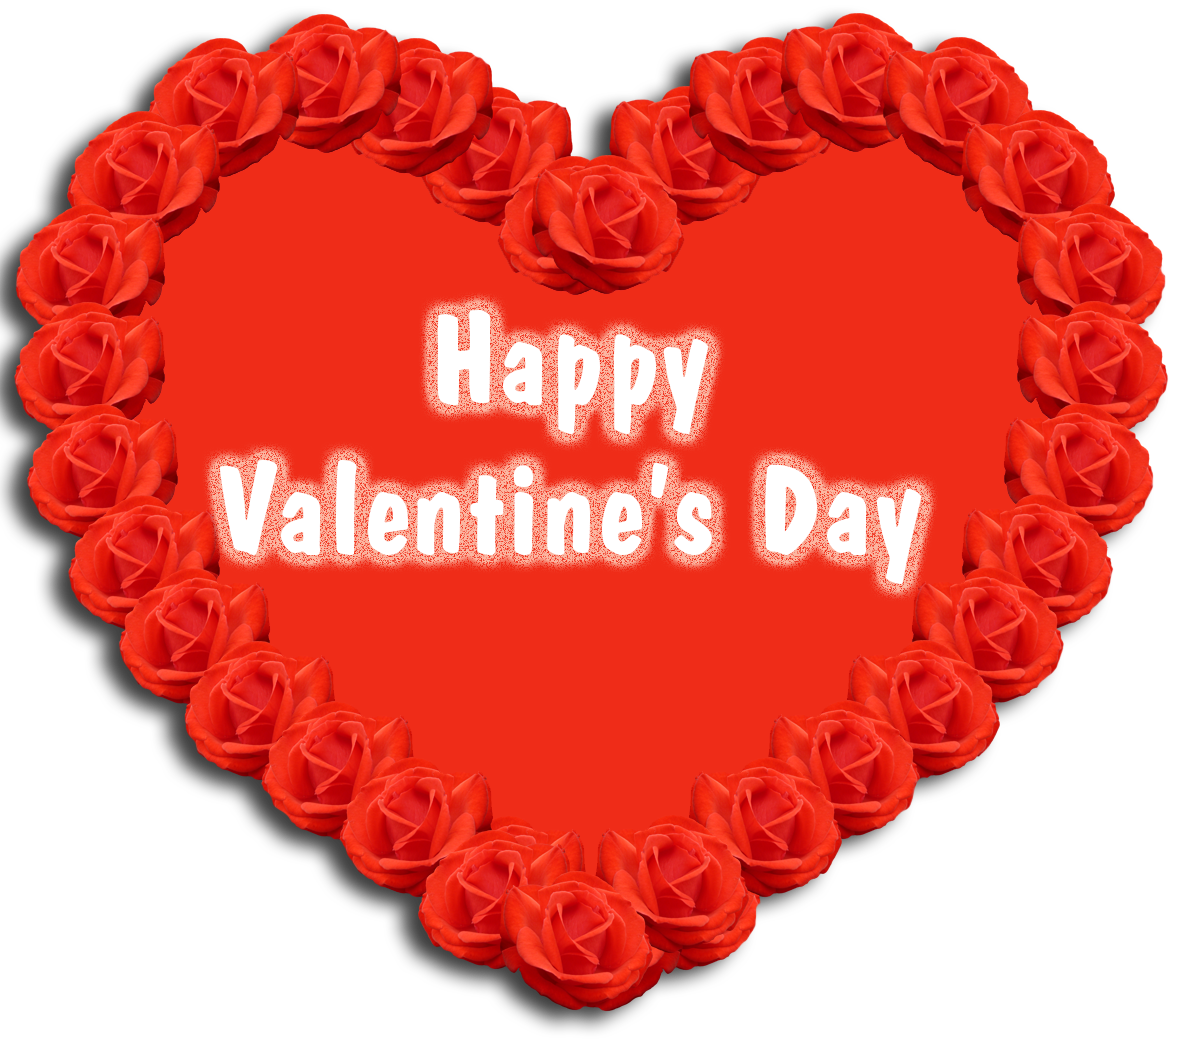 Happy Valentine's day greeting heart roses